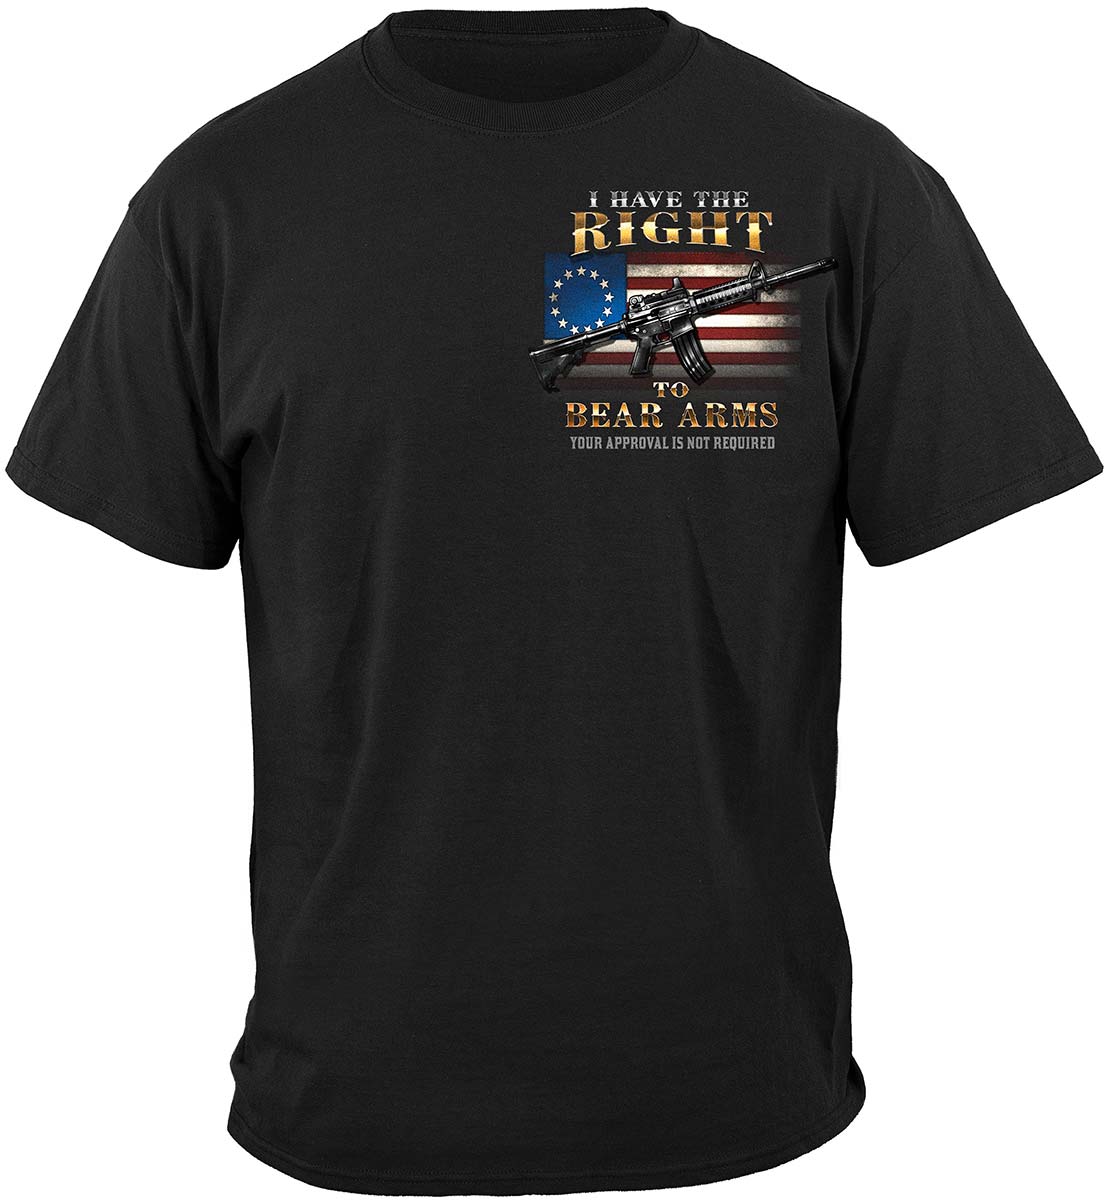 2nd Amendment Your Approval Is not Required Premium T-SHIRT